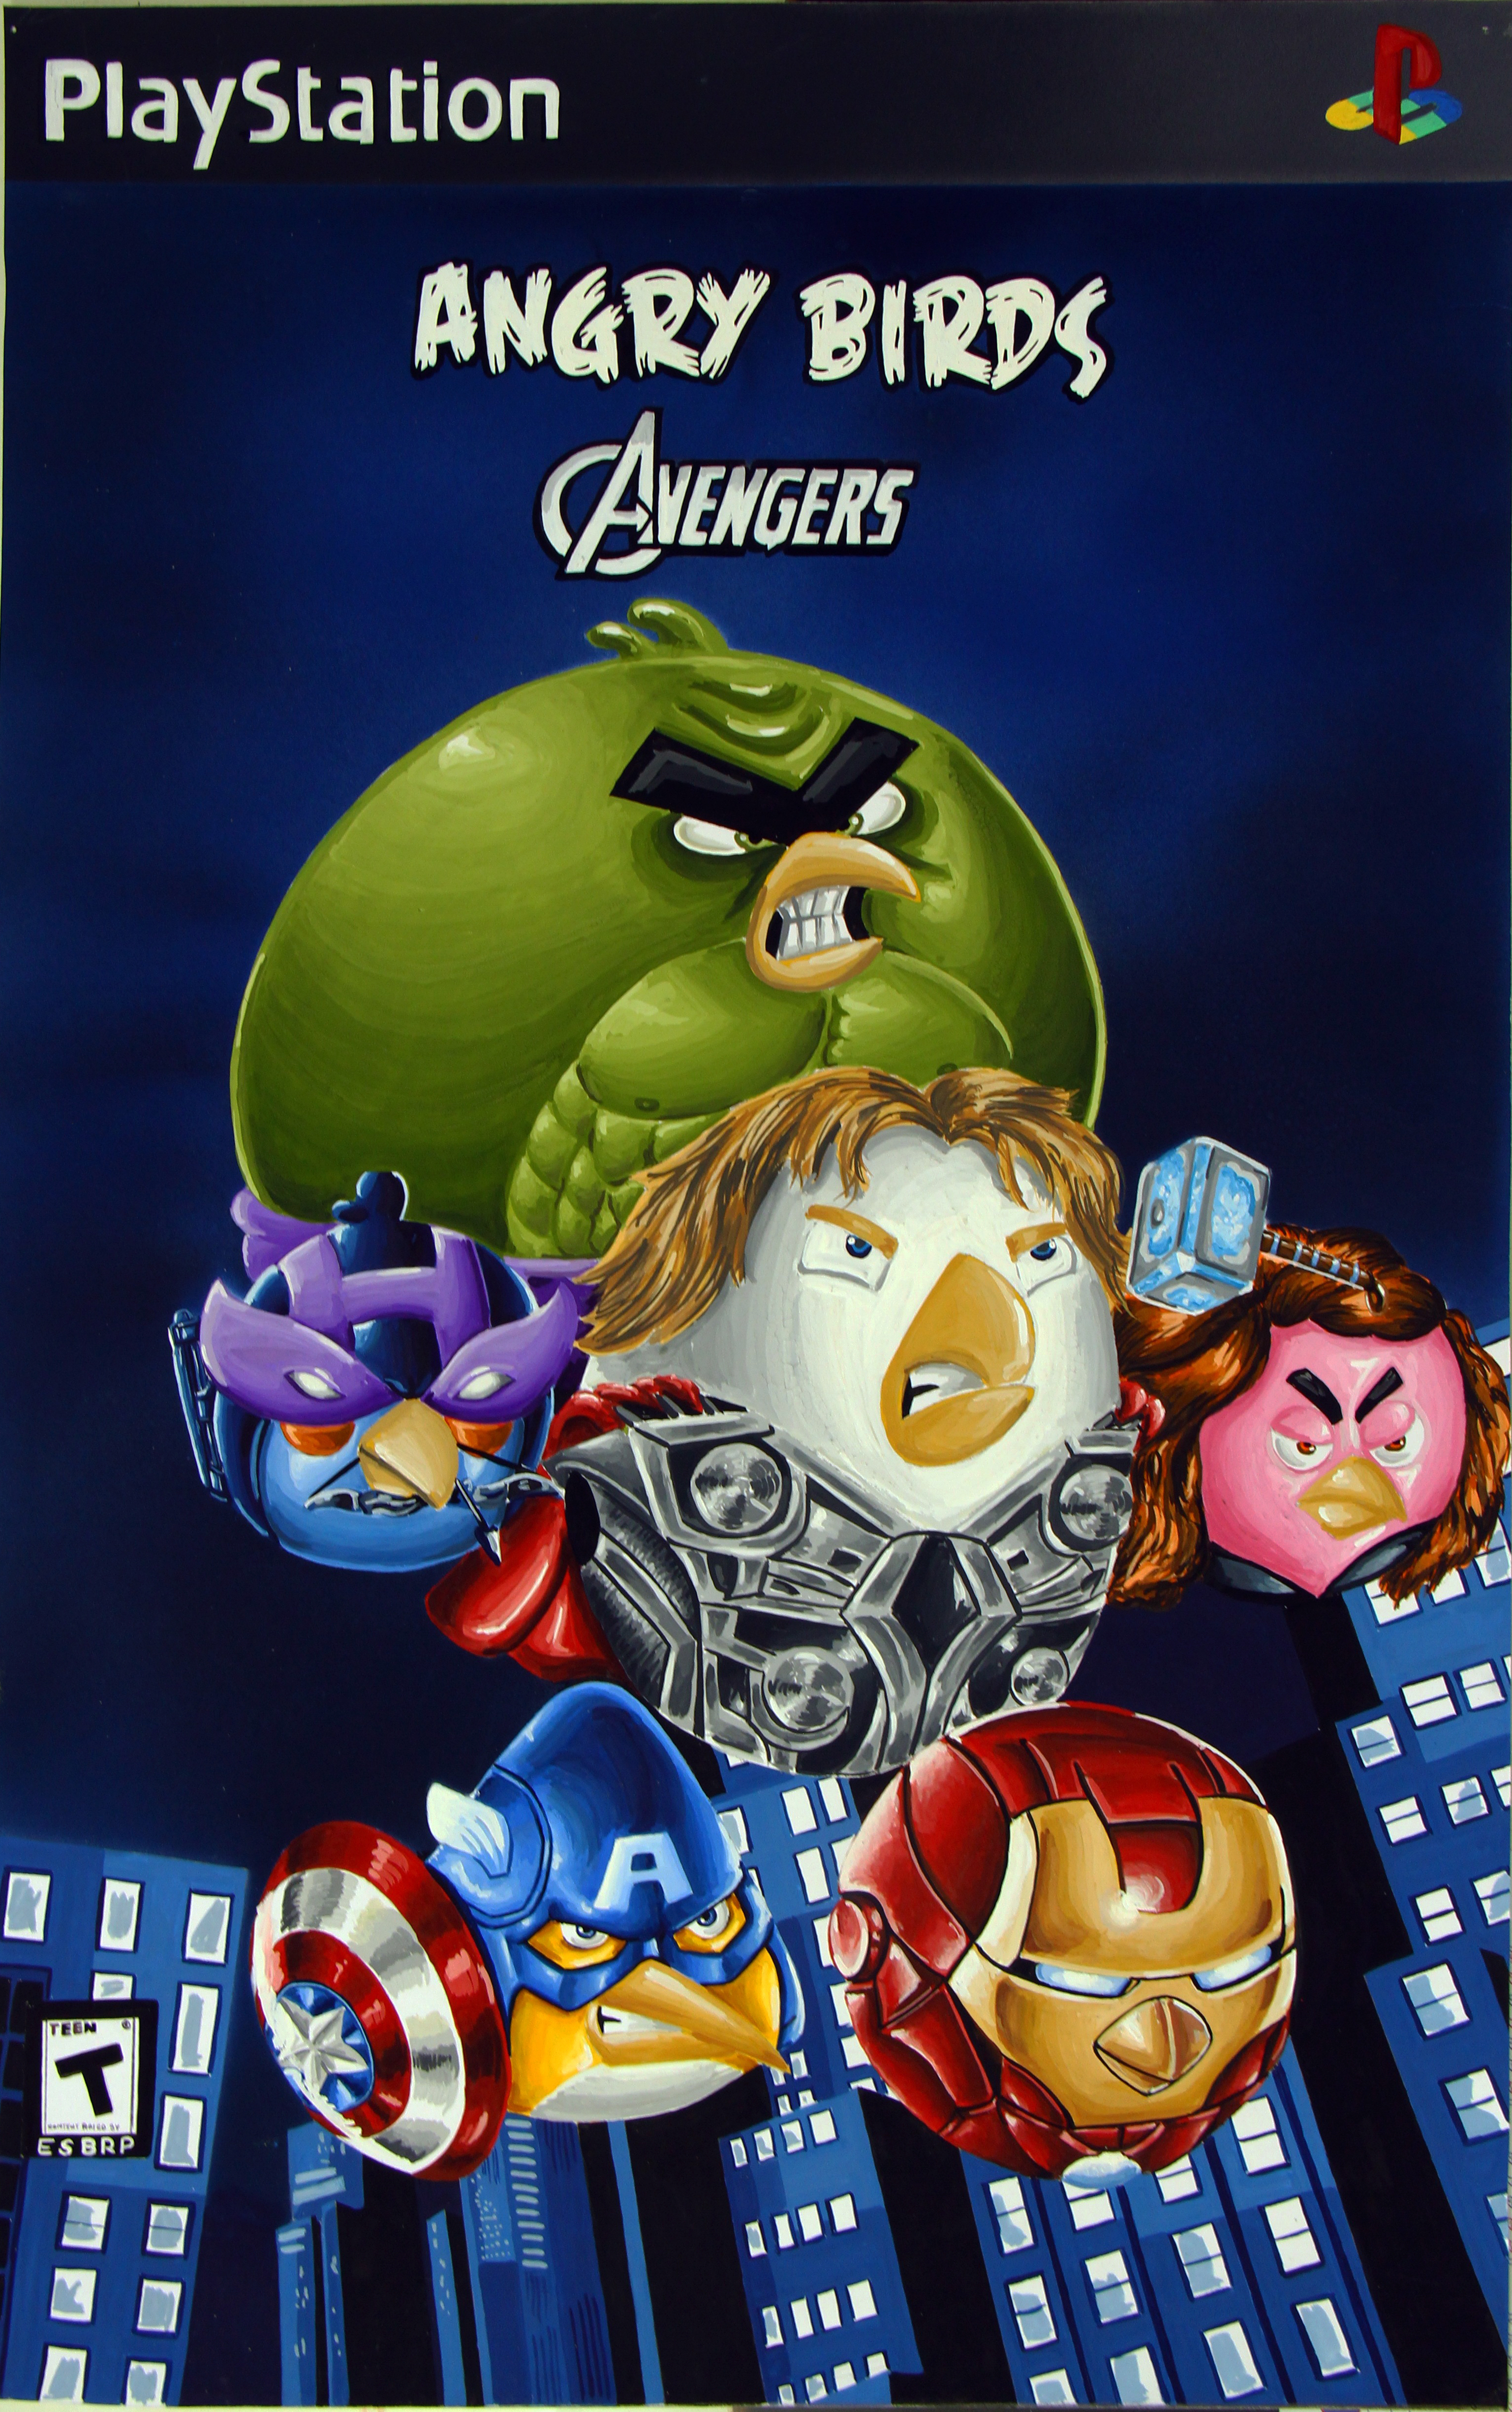 angry birds avengers game poster by ishaansharma456 on DeviantArt